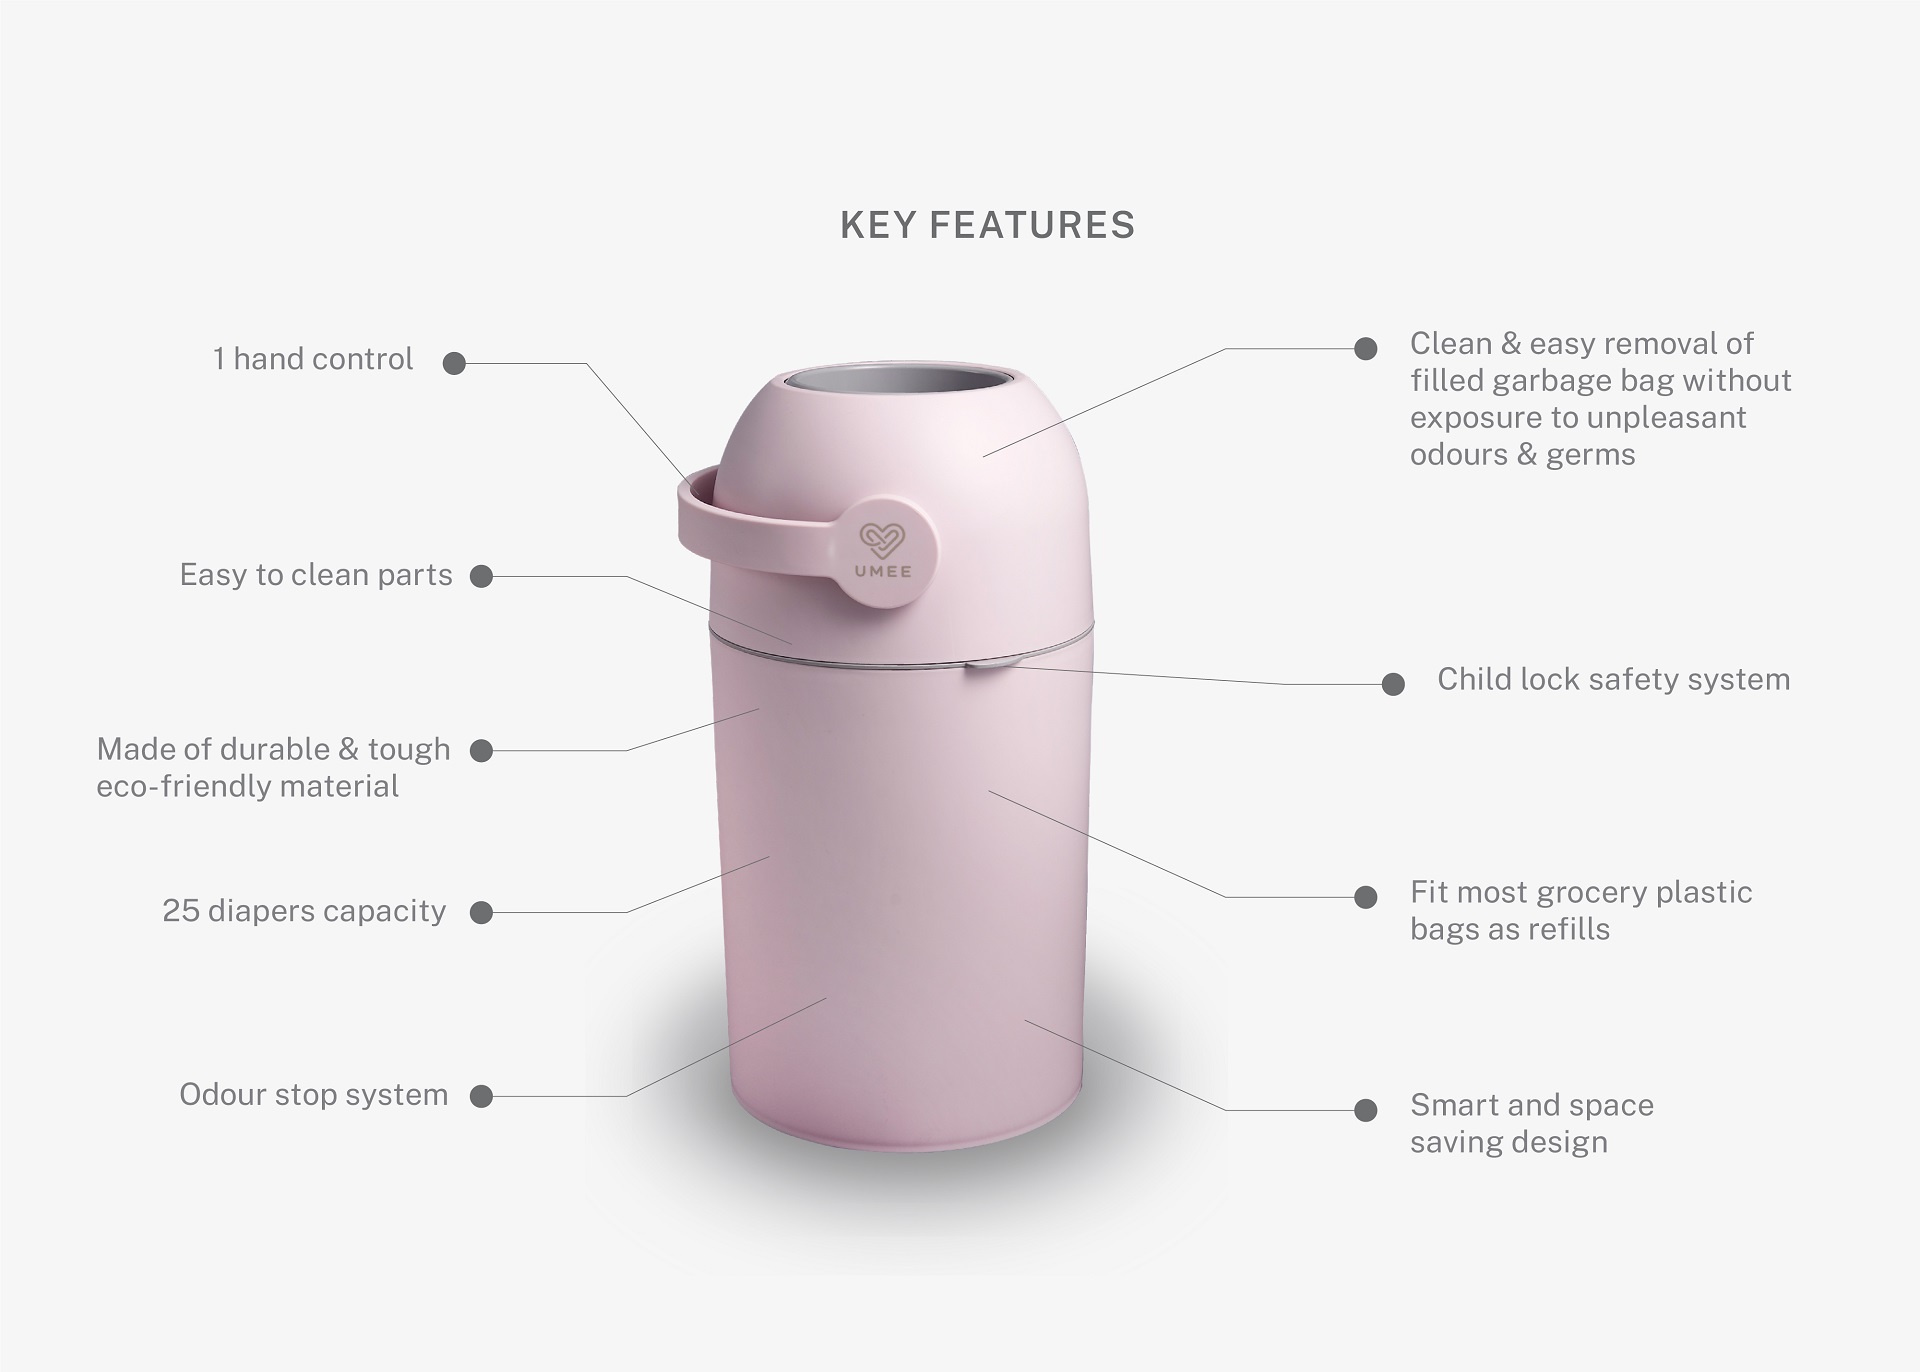 bh-website_NurseryProduct-page-Umee-Diaper-Pail_Aw02B_Key-Features.jpg